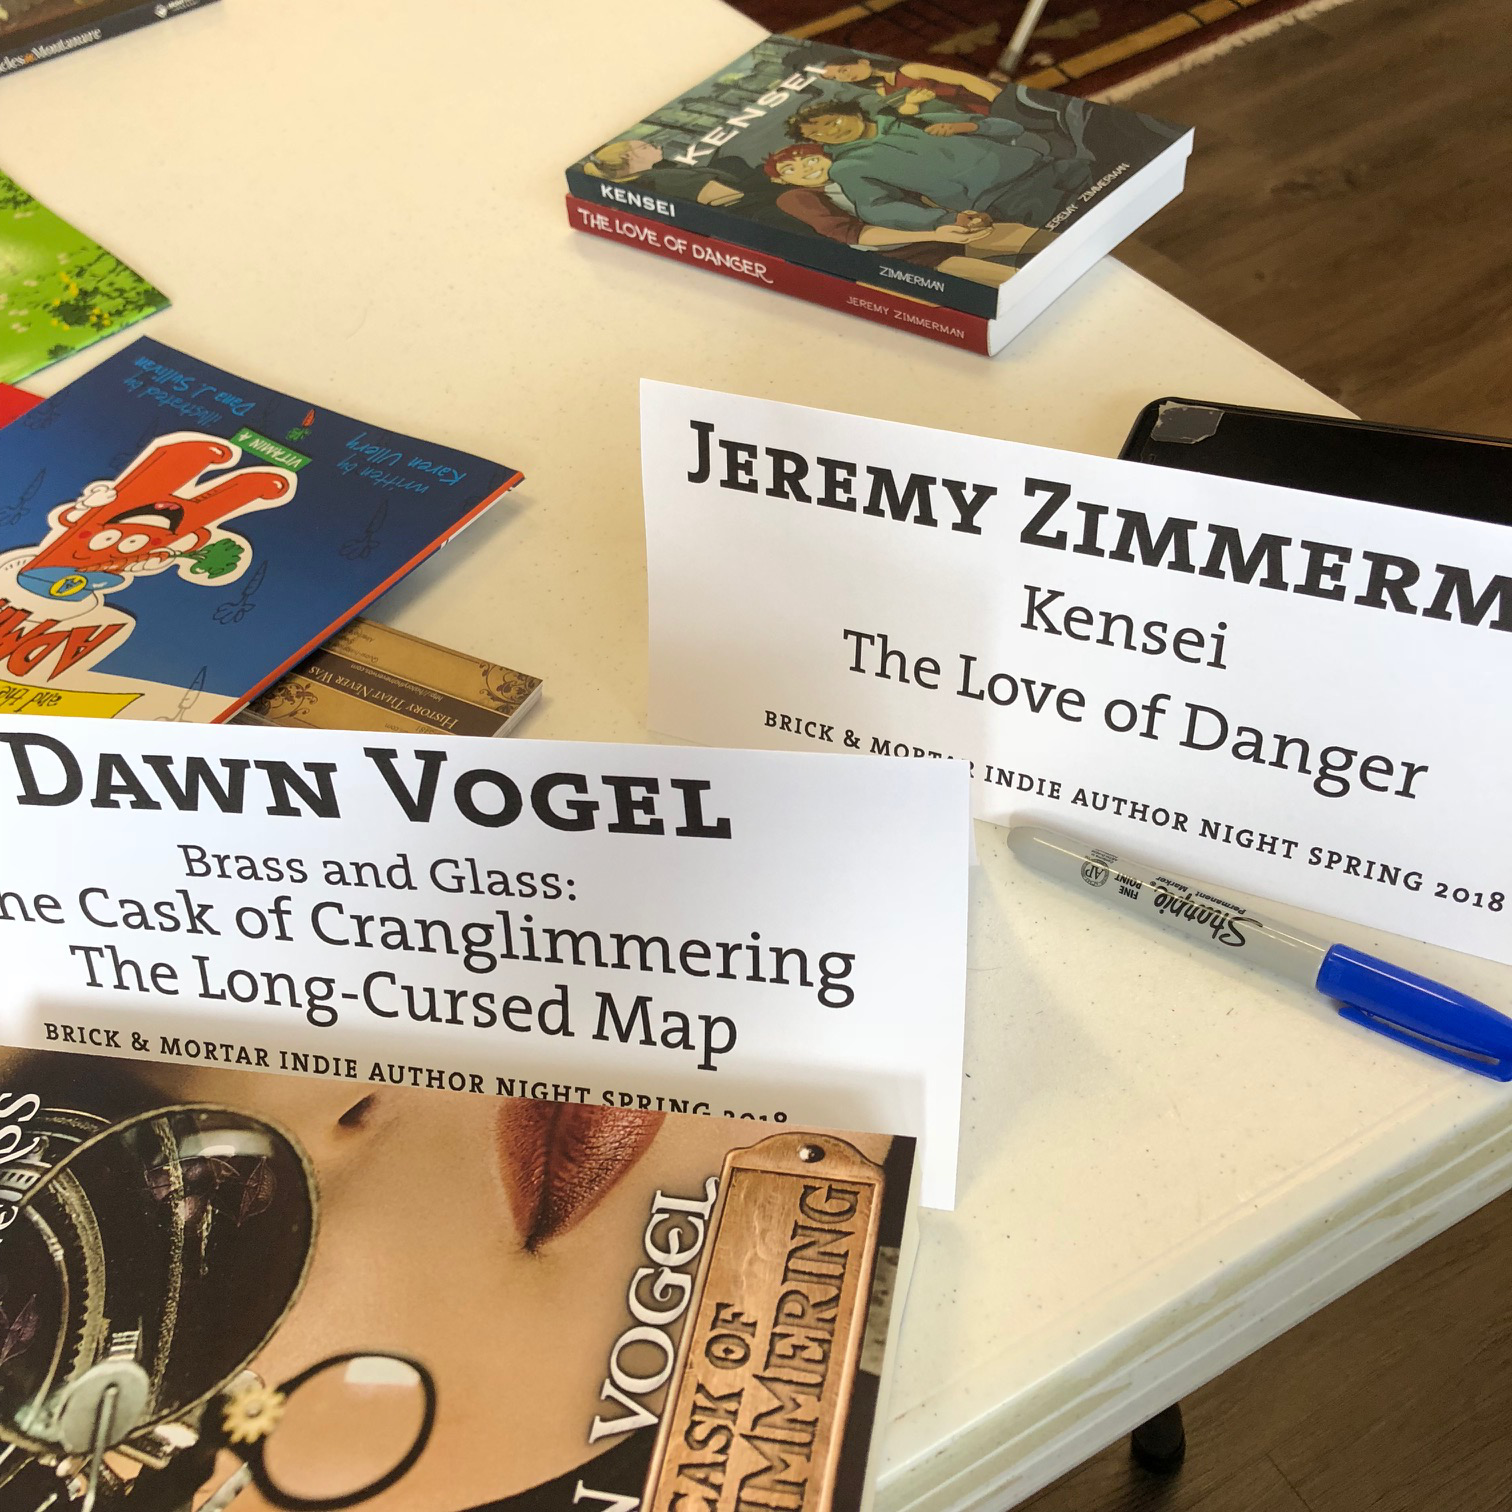 Photo of name tags and books.